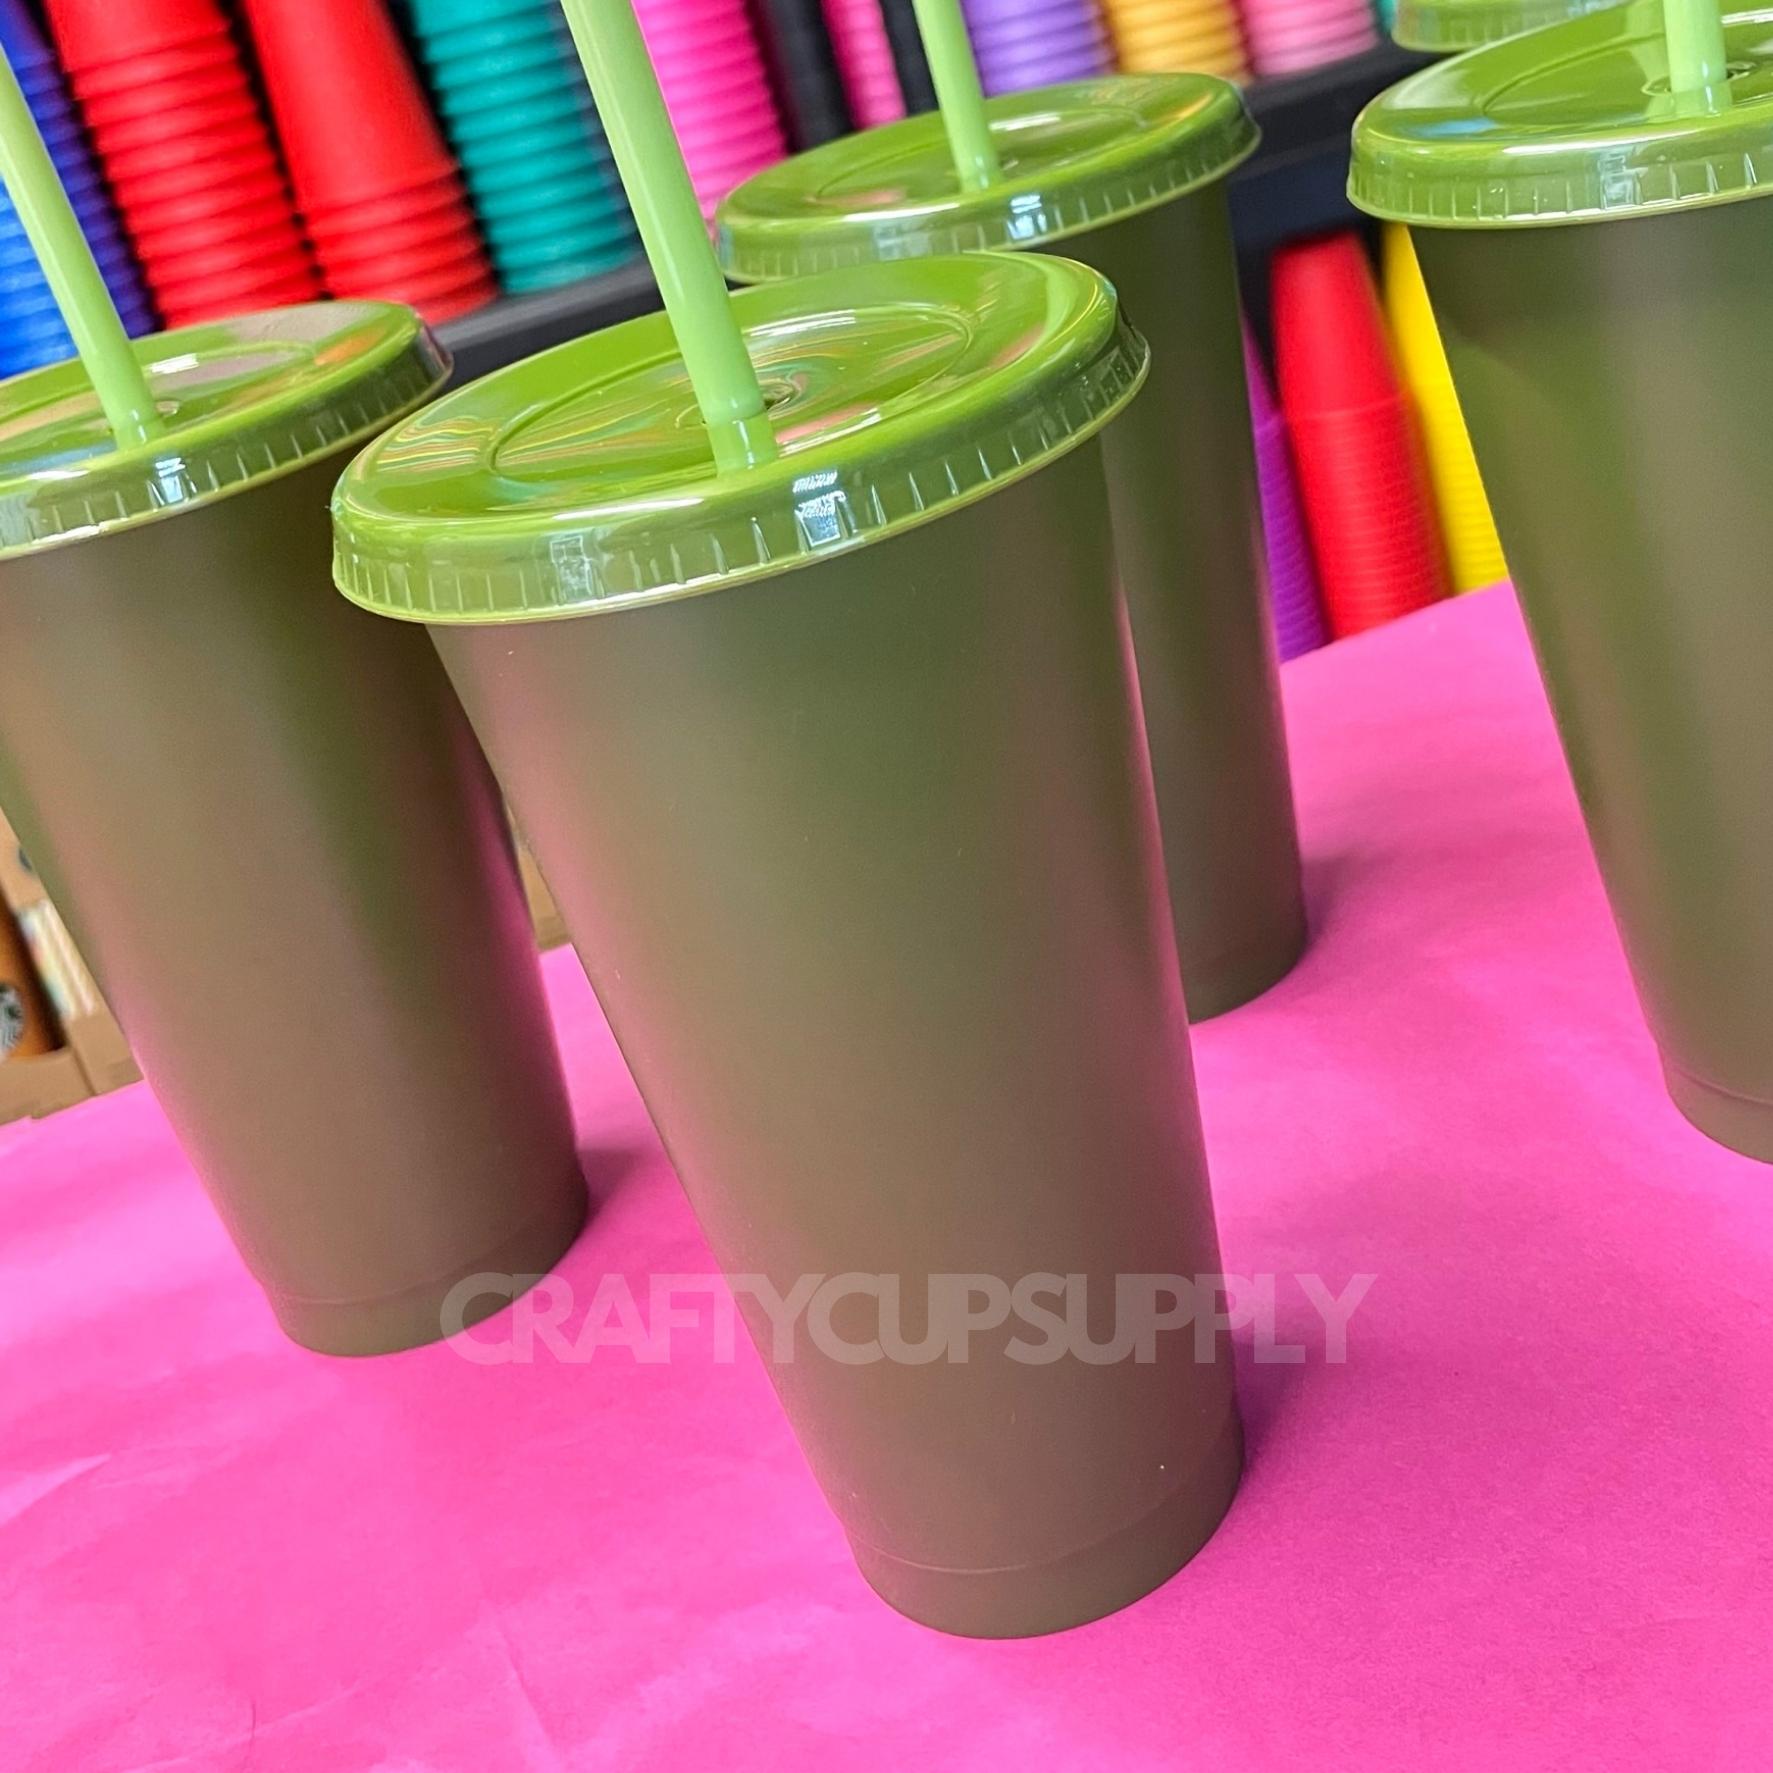 green cups for cricut crafts